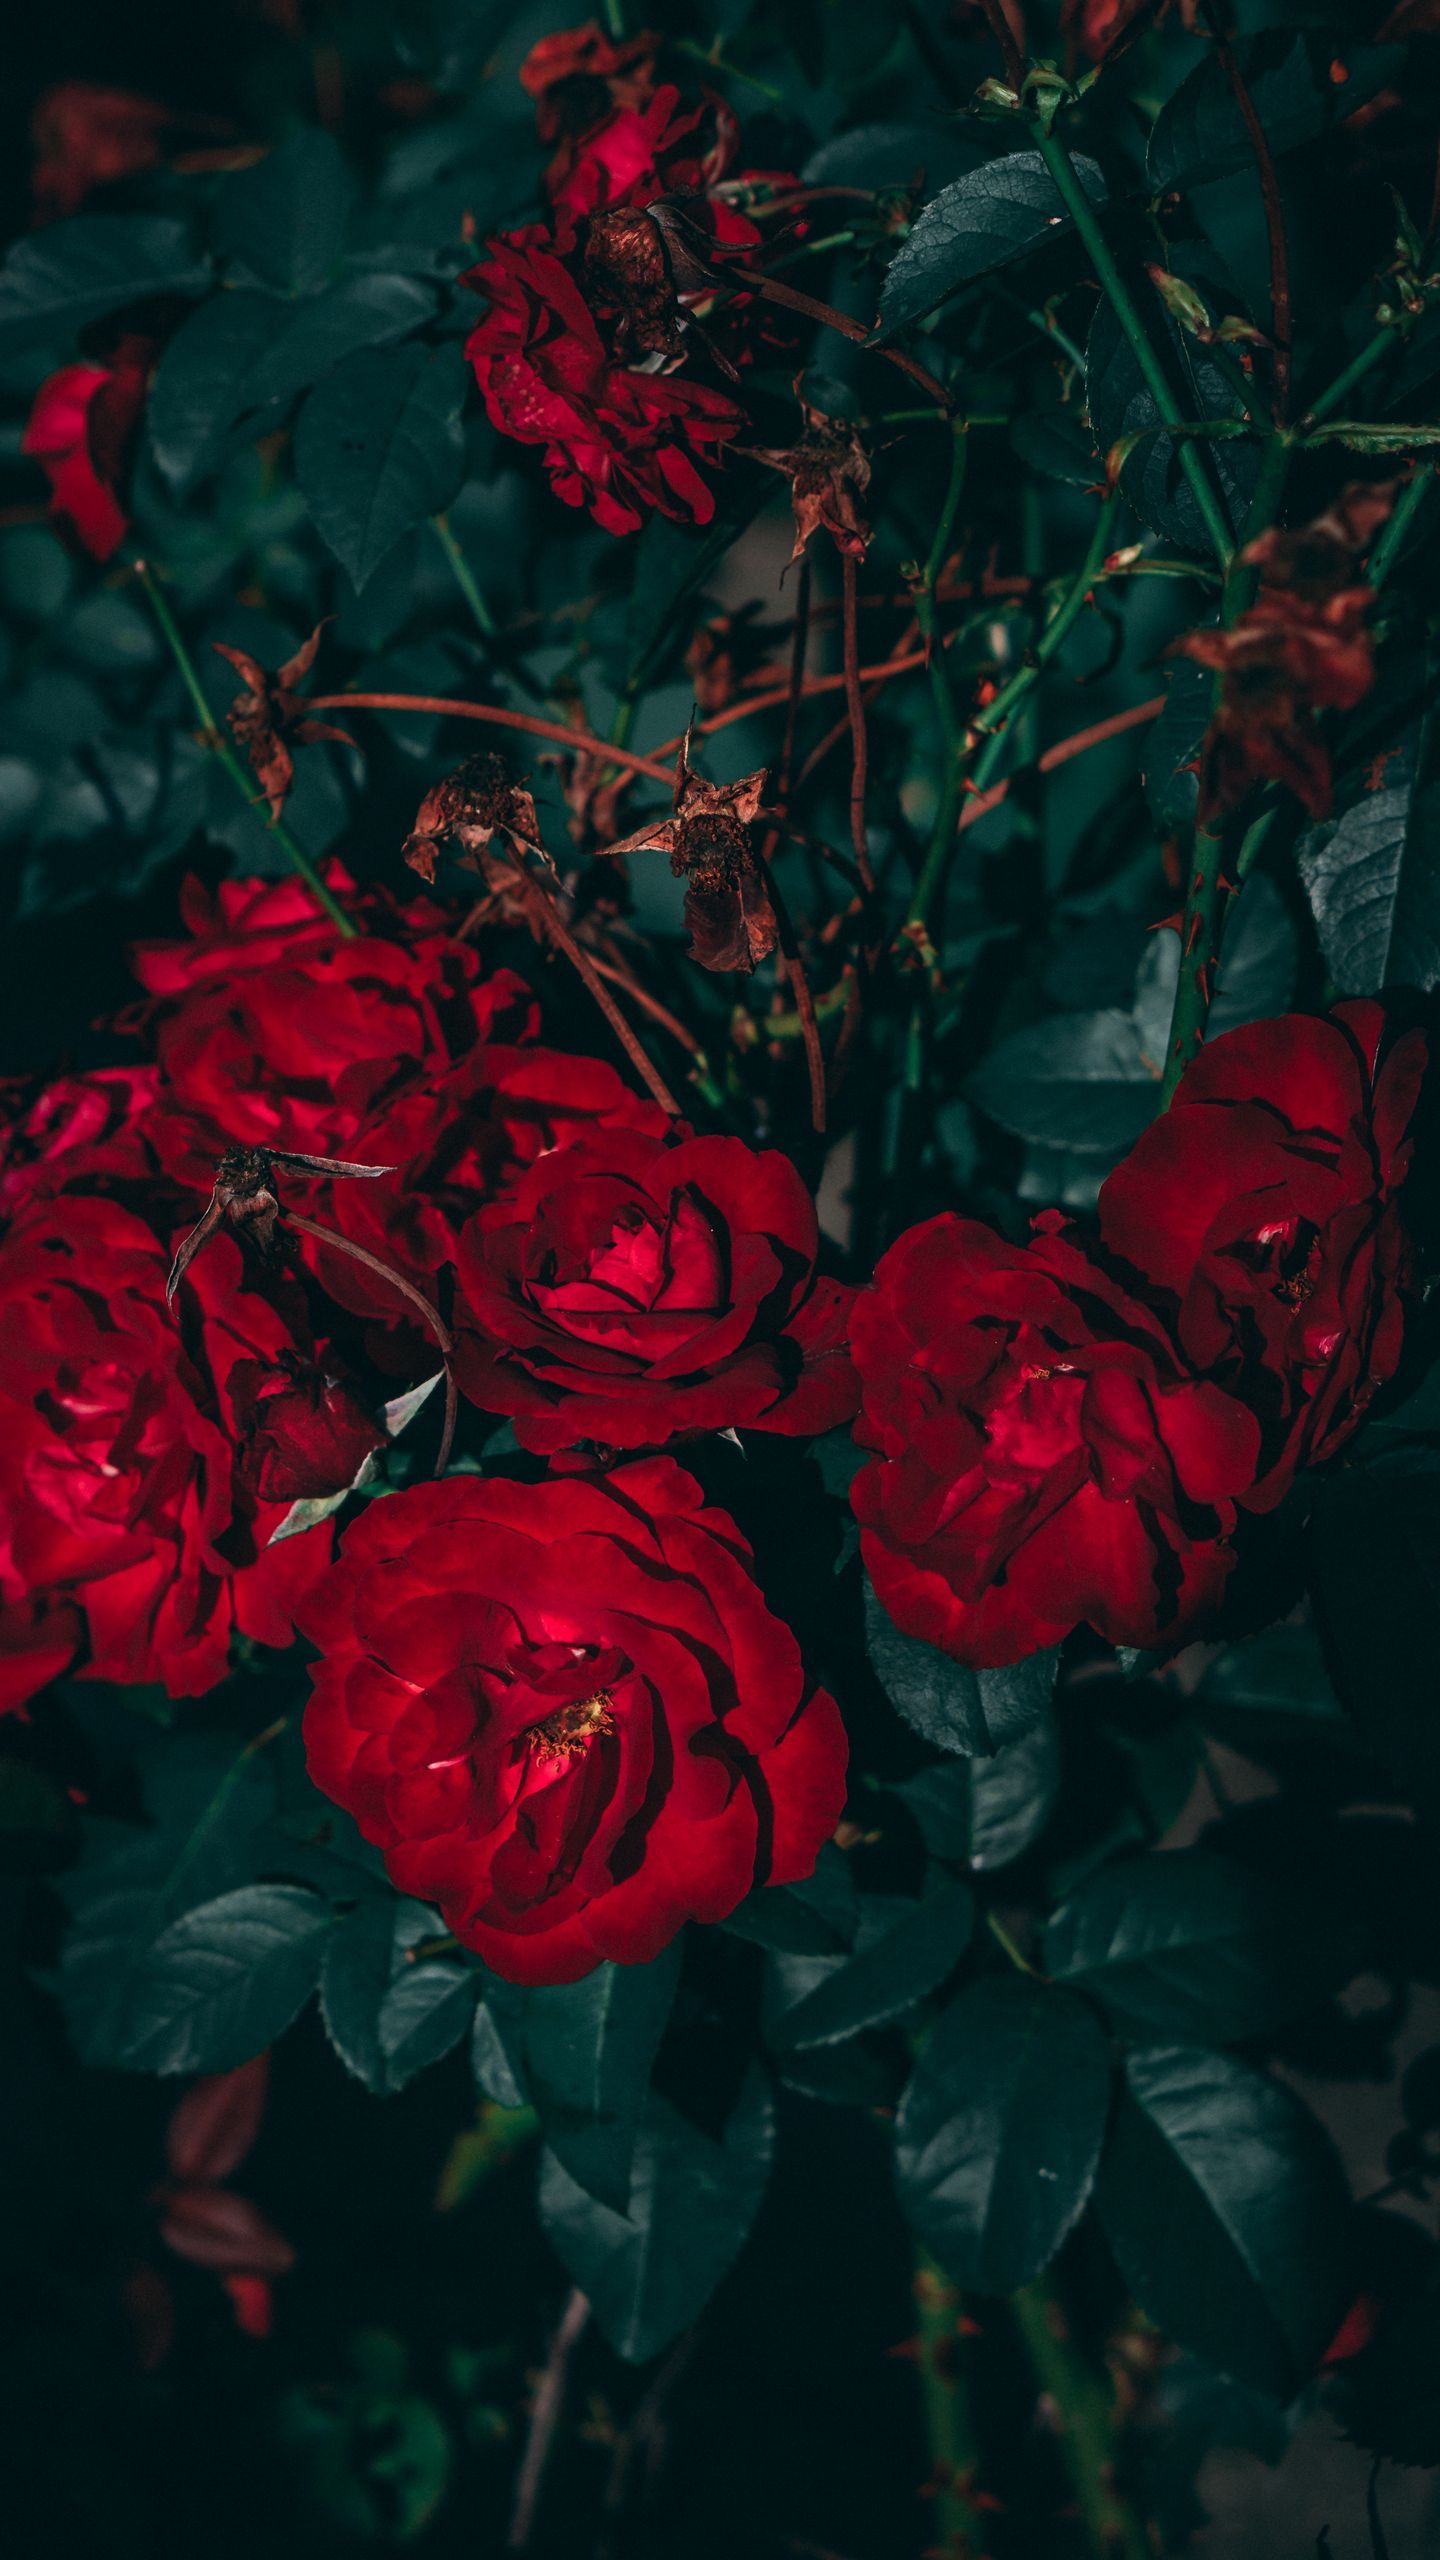 A bunch of red roses in the dark - Garden, roses